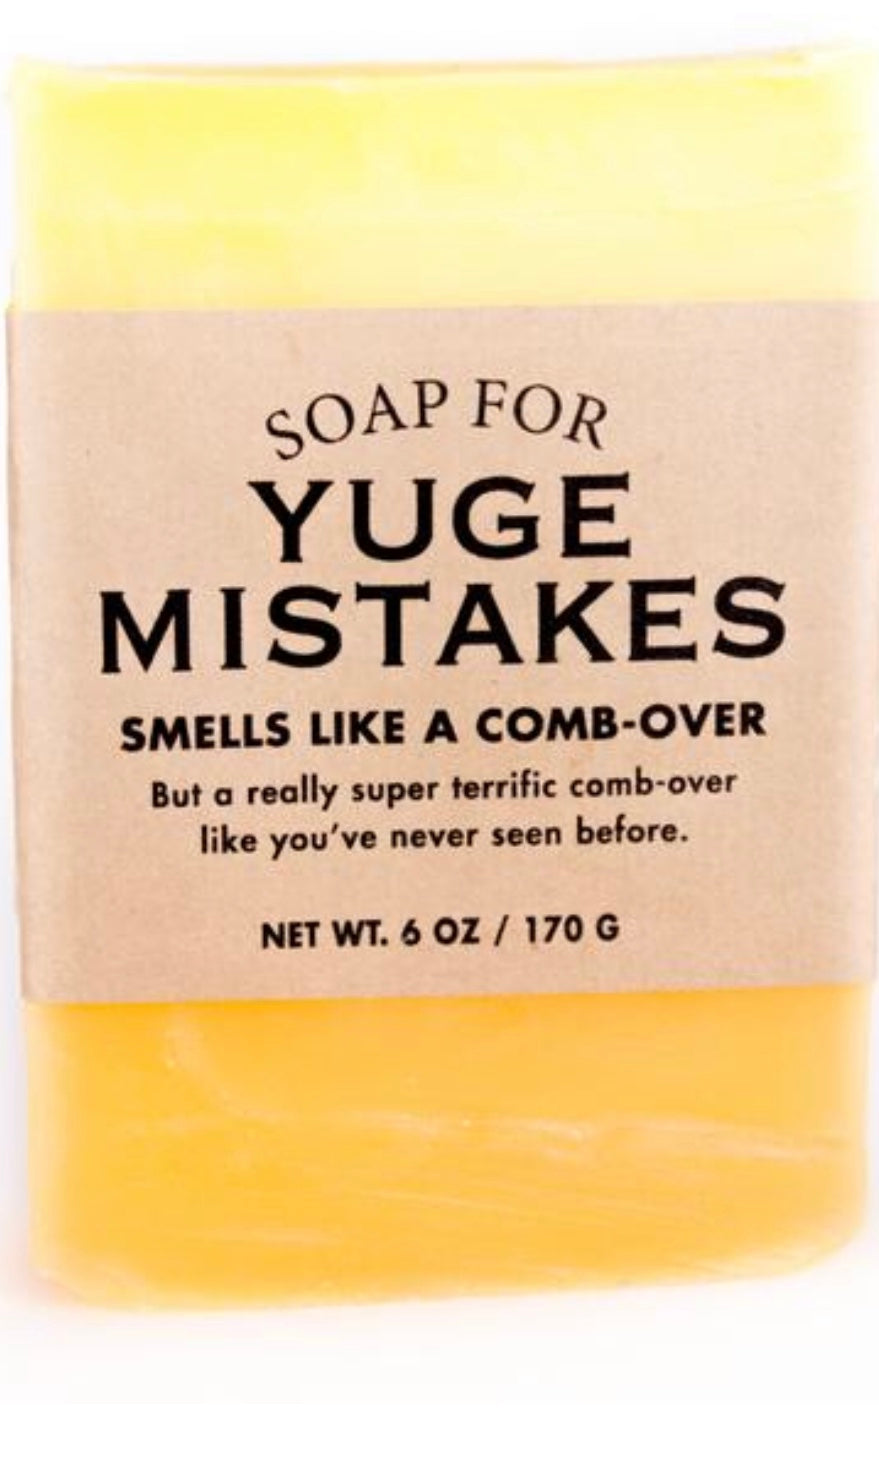 Whisky River Soap for Yuge Mistakes